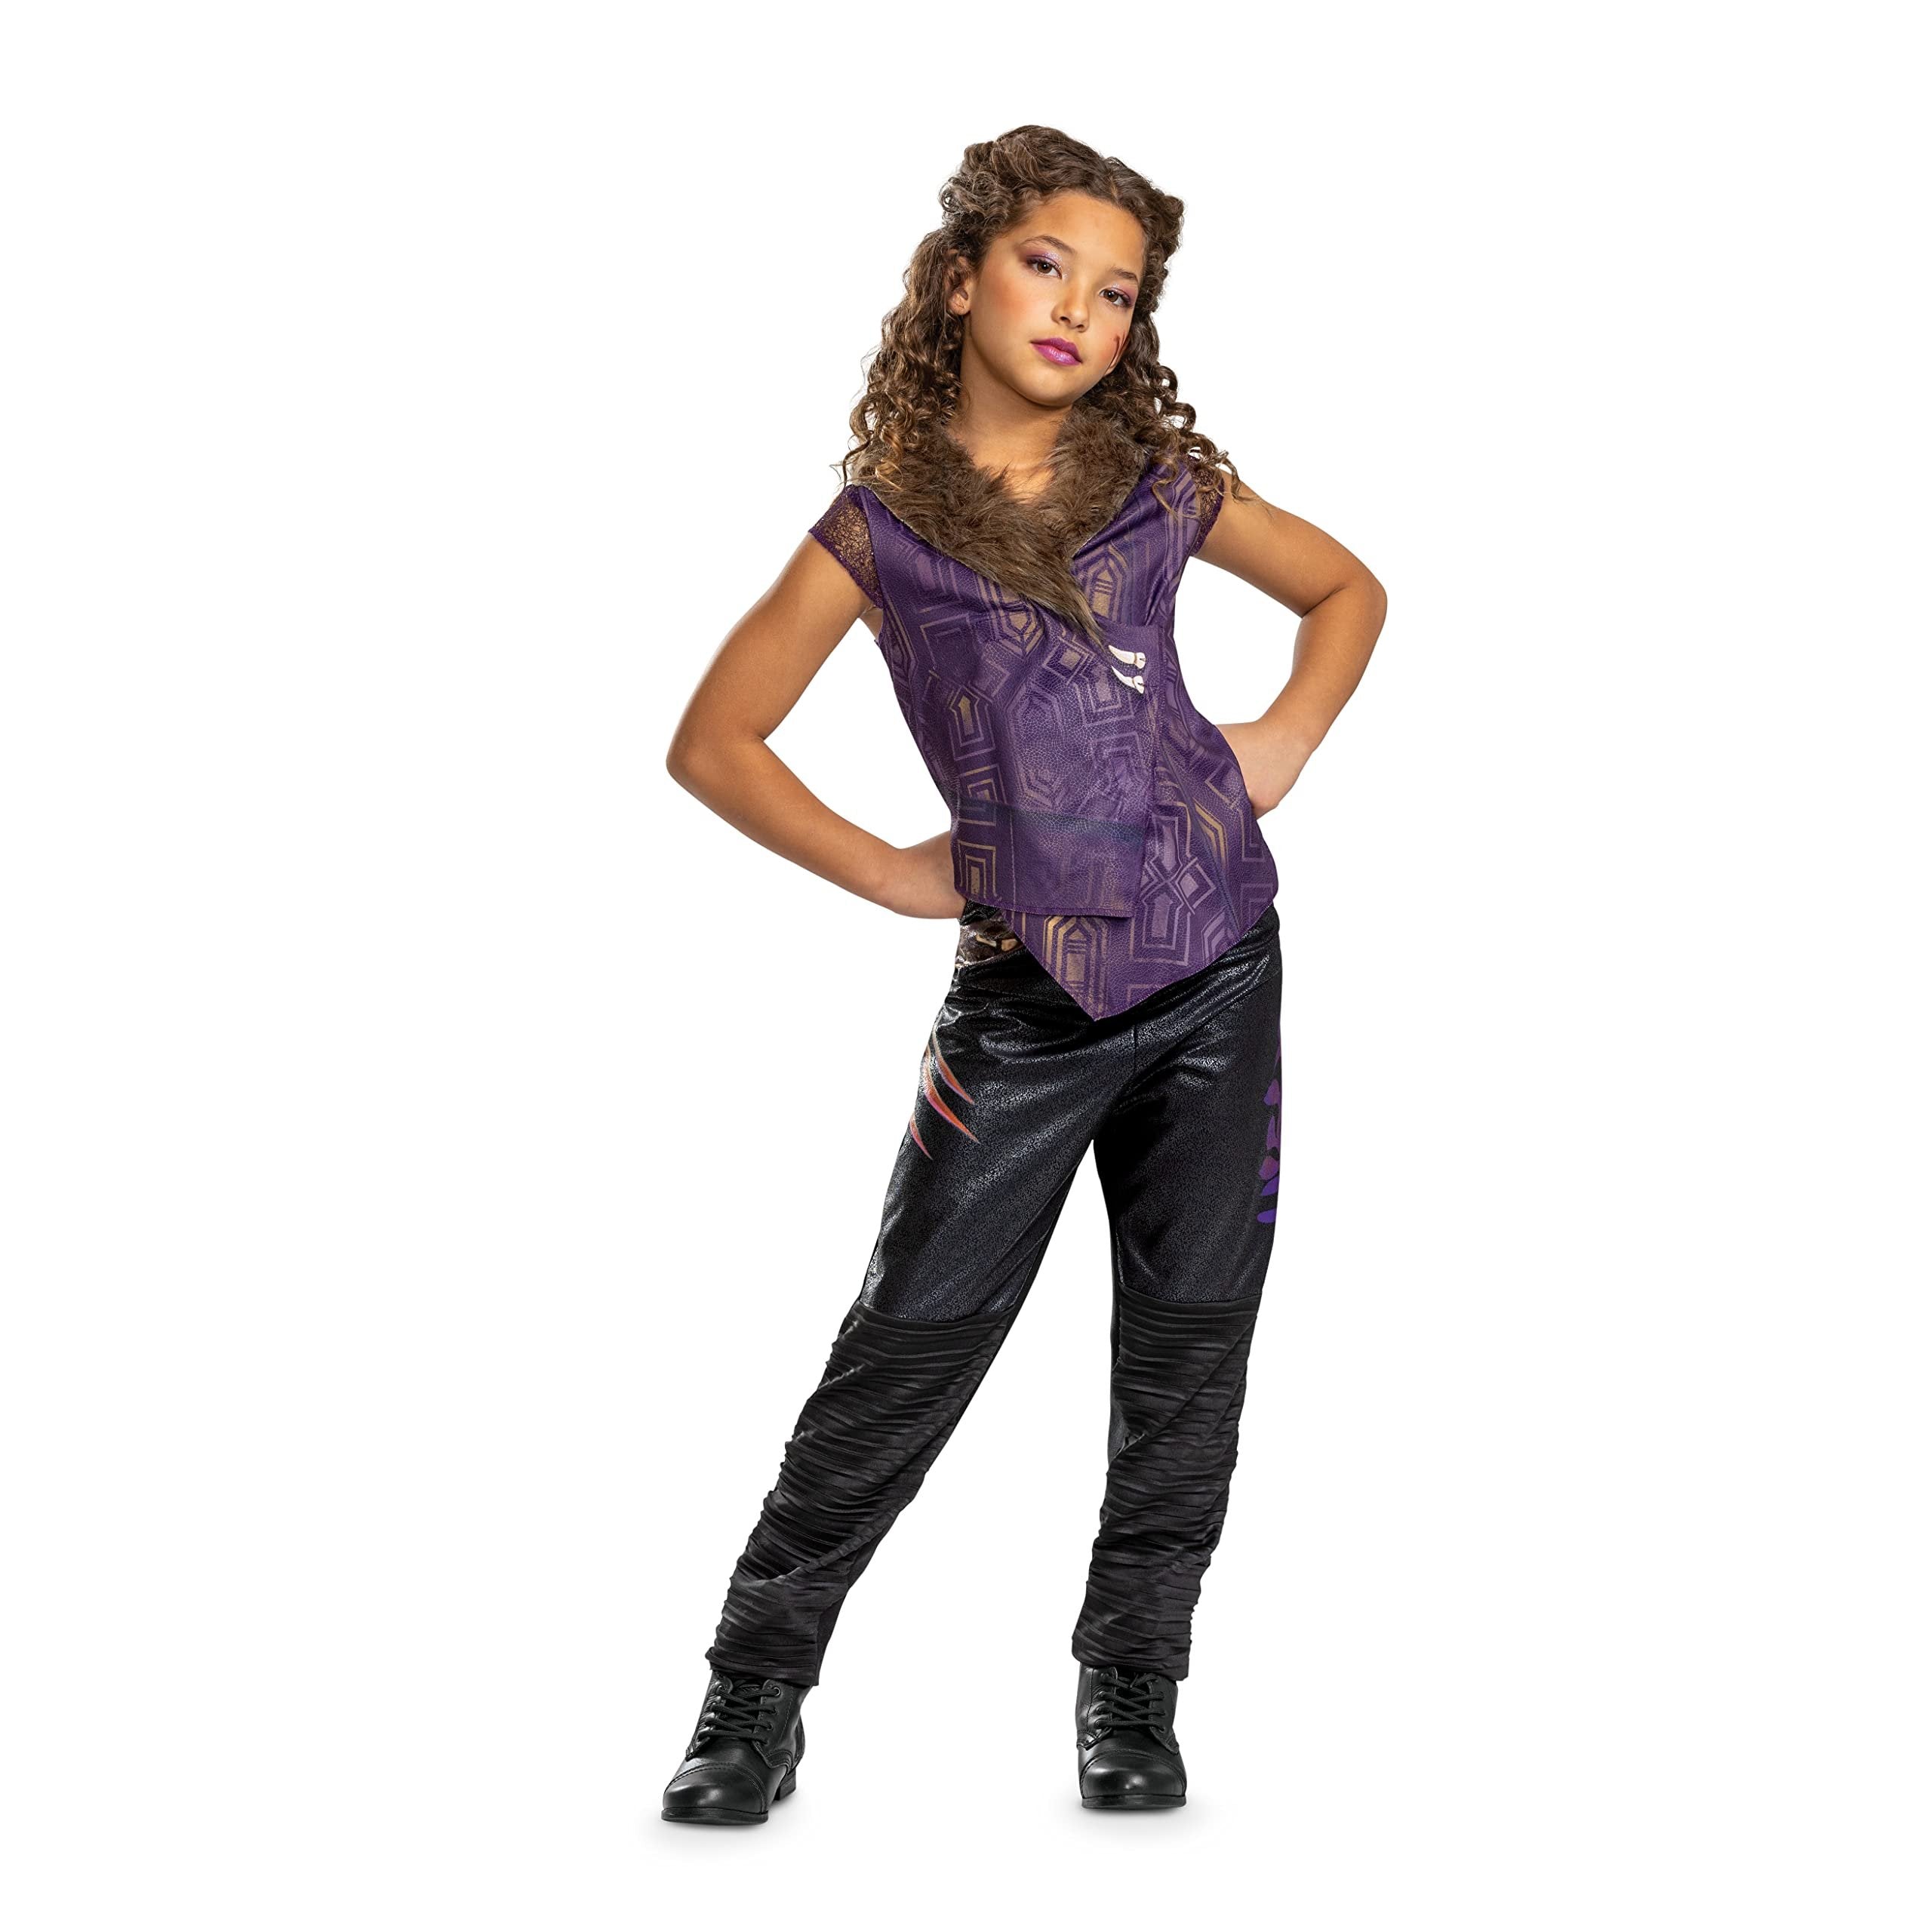 Willa Werewolf Costume for Kids, Official Disney Zombies 3 Costume Outfit, Child Size Medium (7-8)